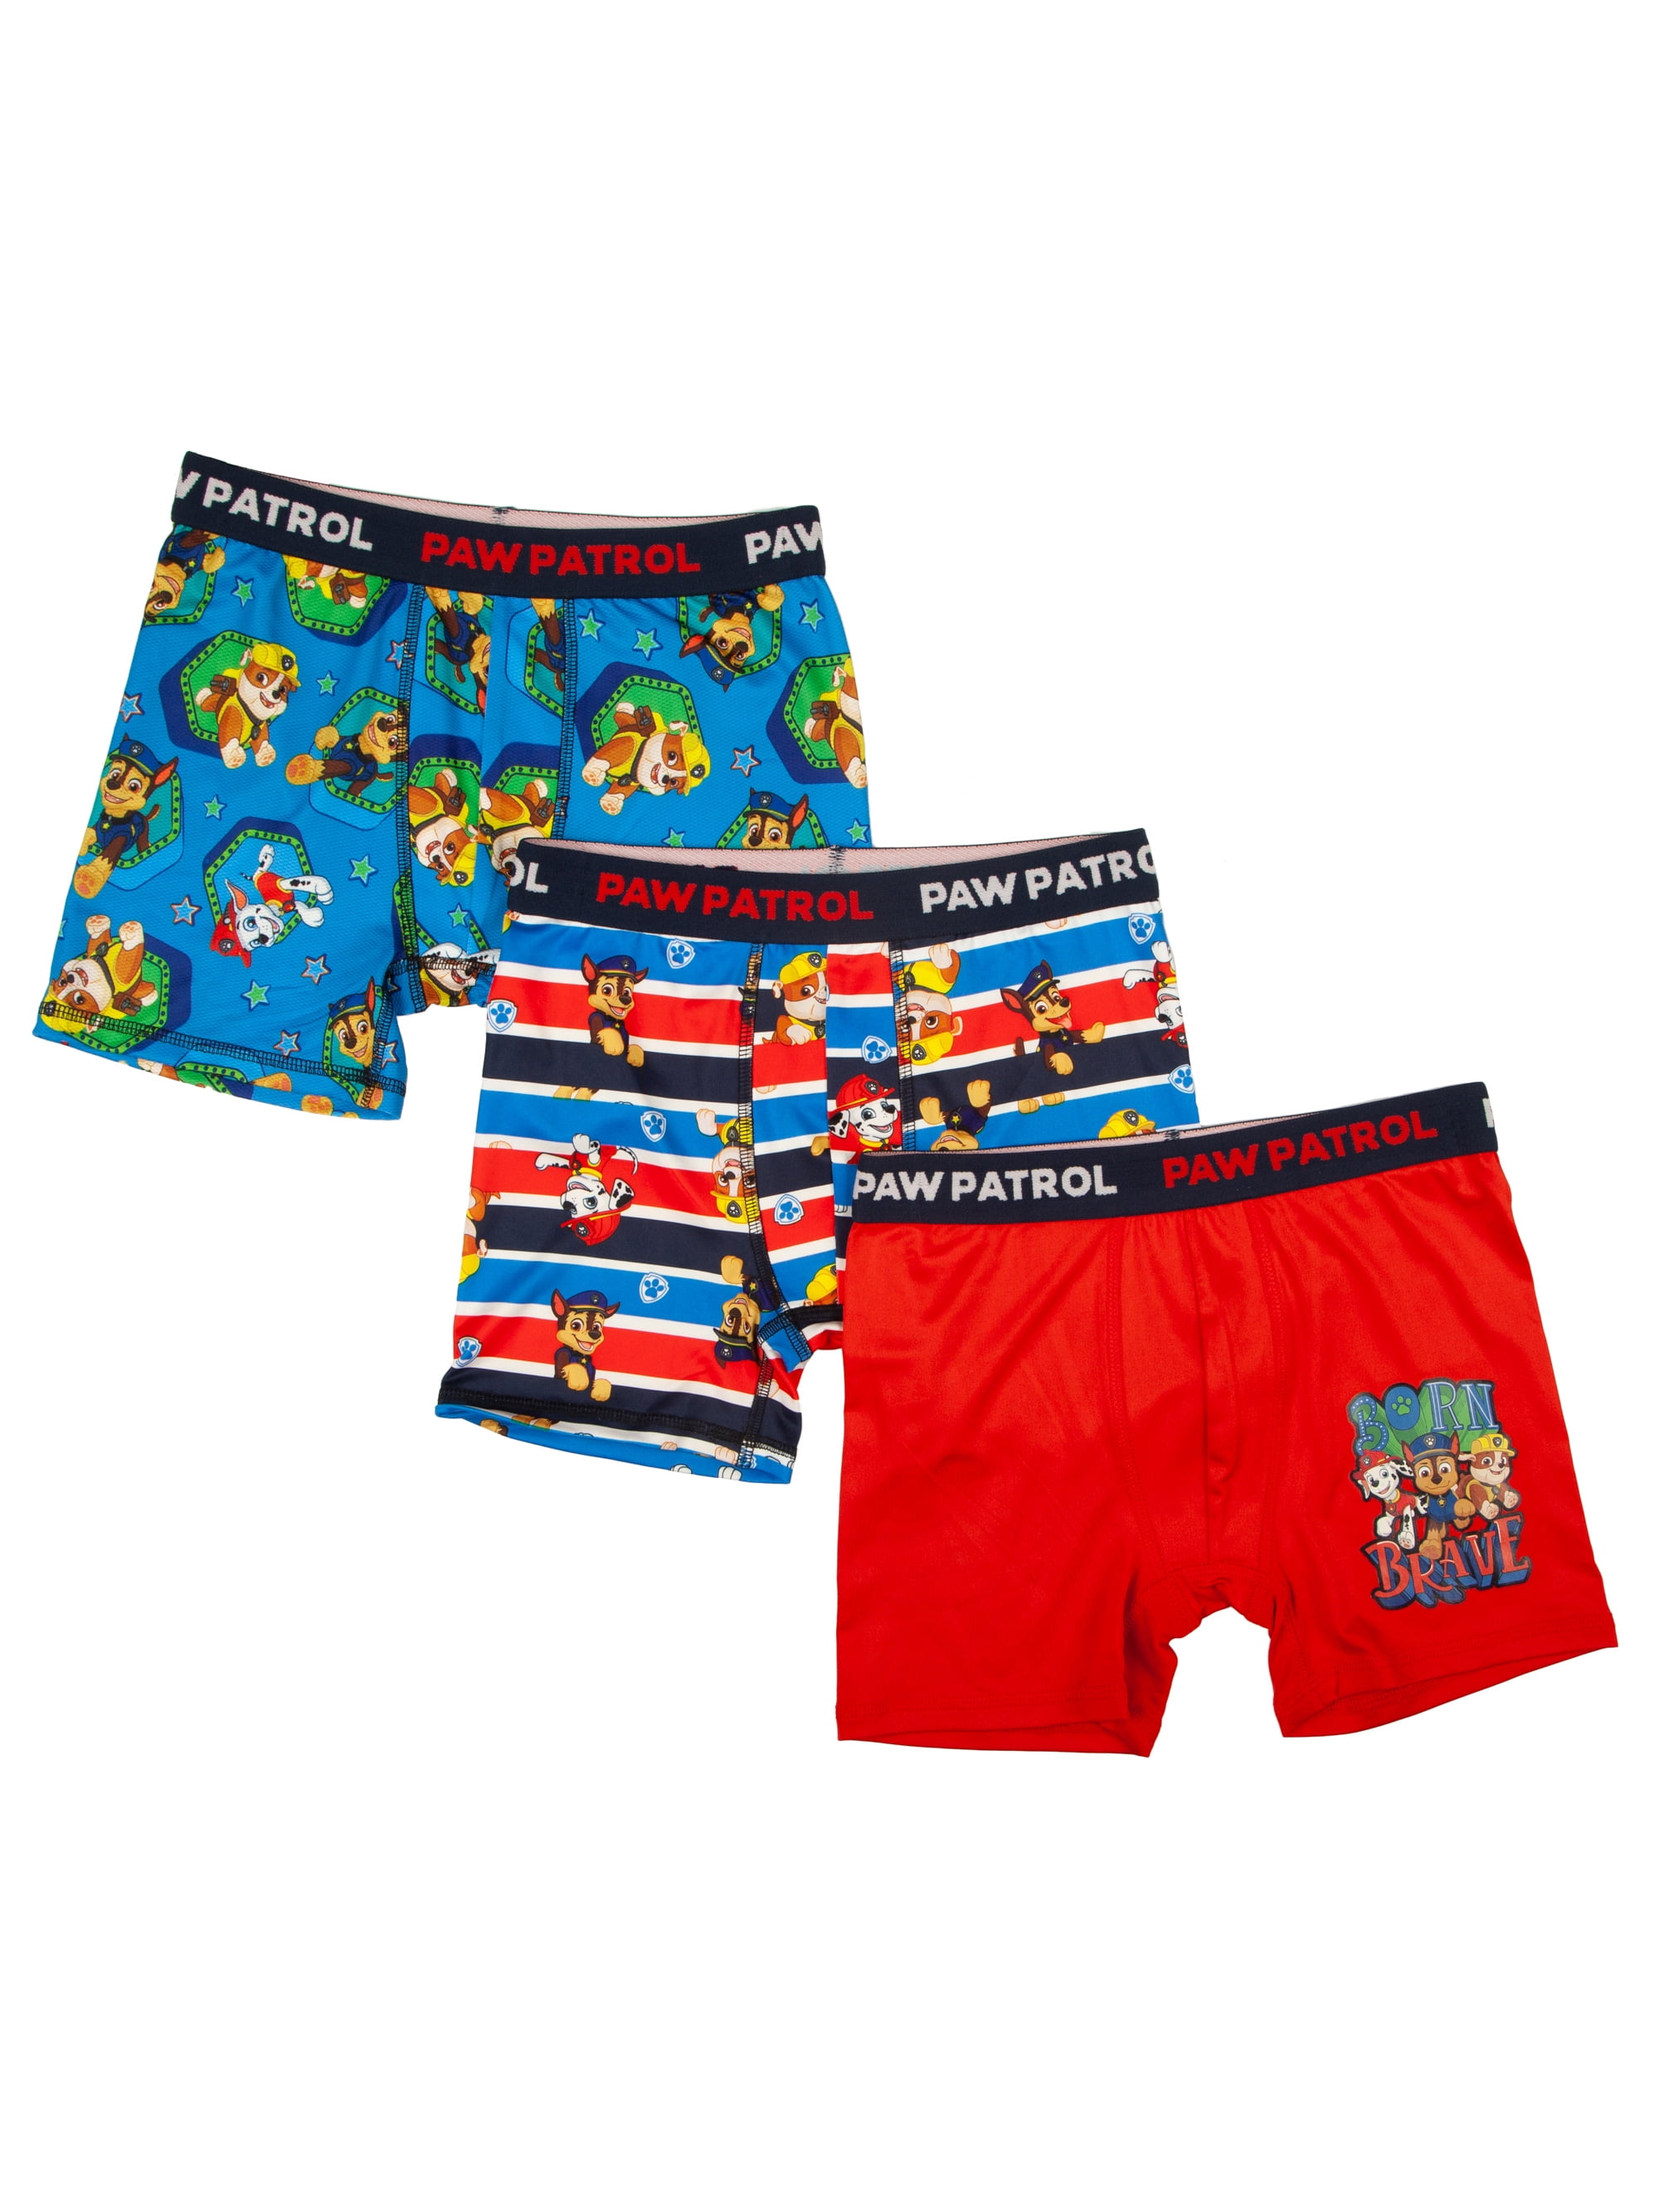 Boys Paw Patrol ' Catch The Waves ' Swimming Trunks Boxers